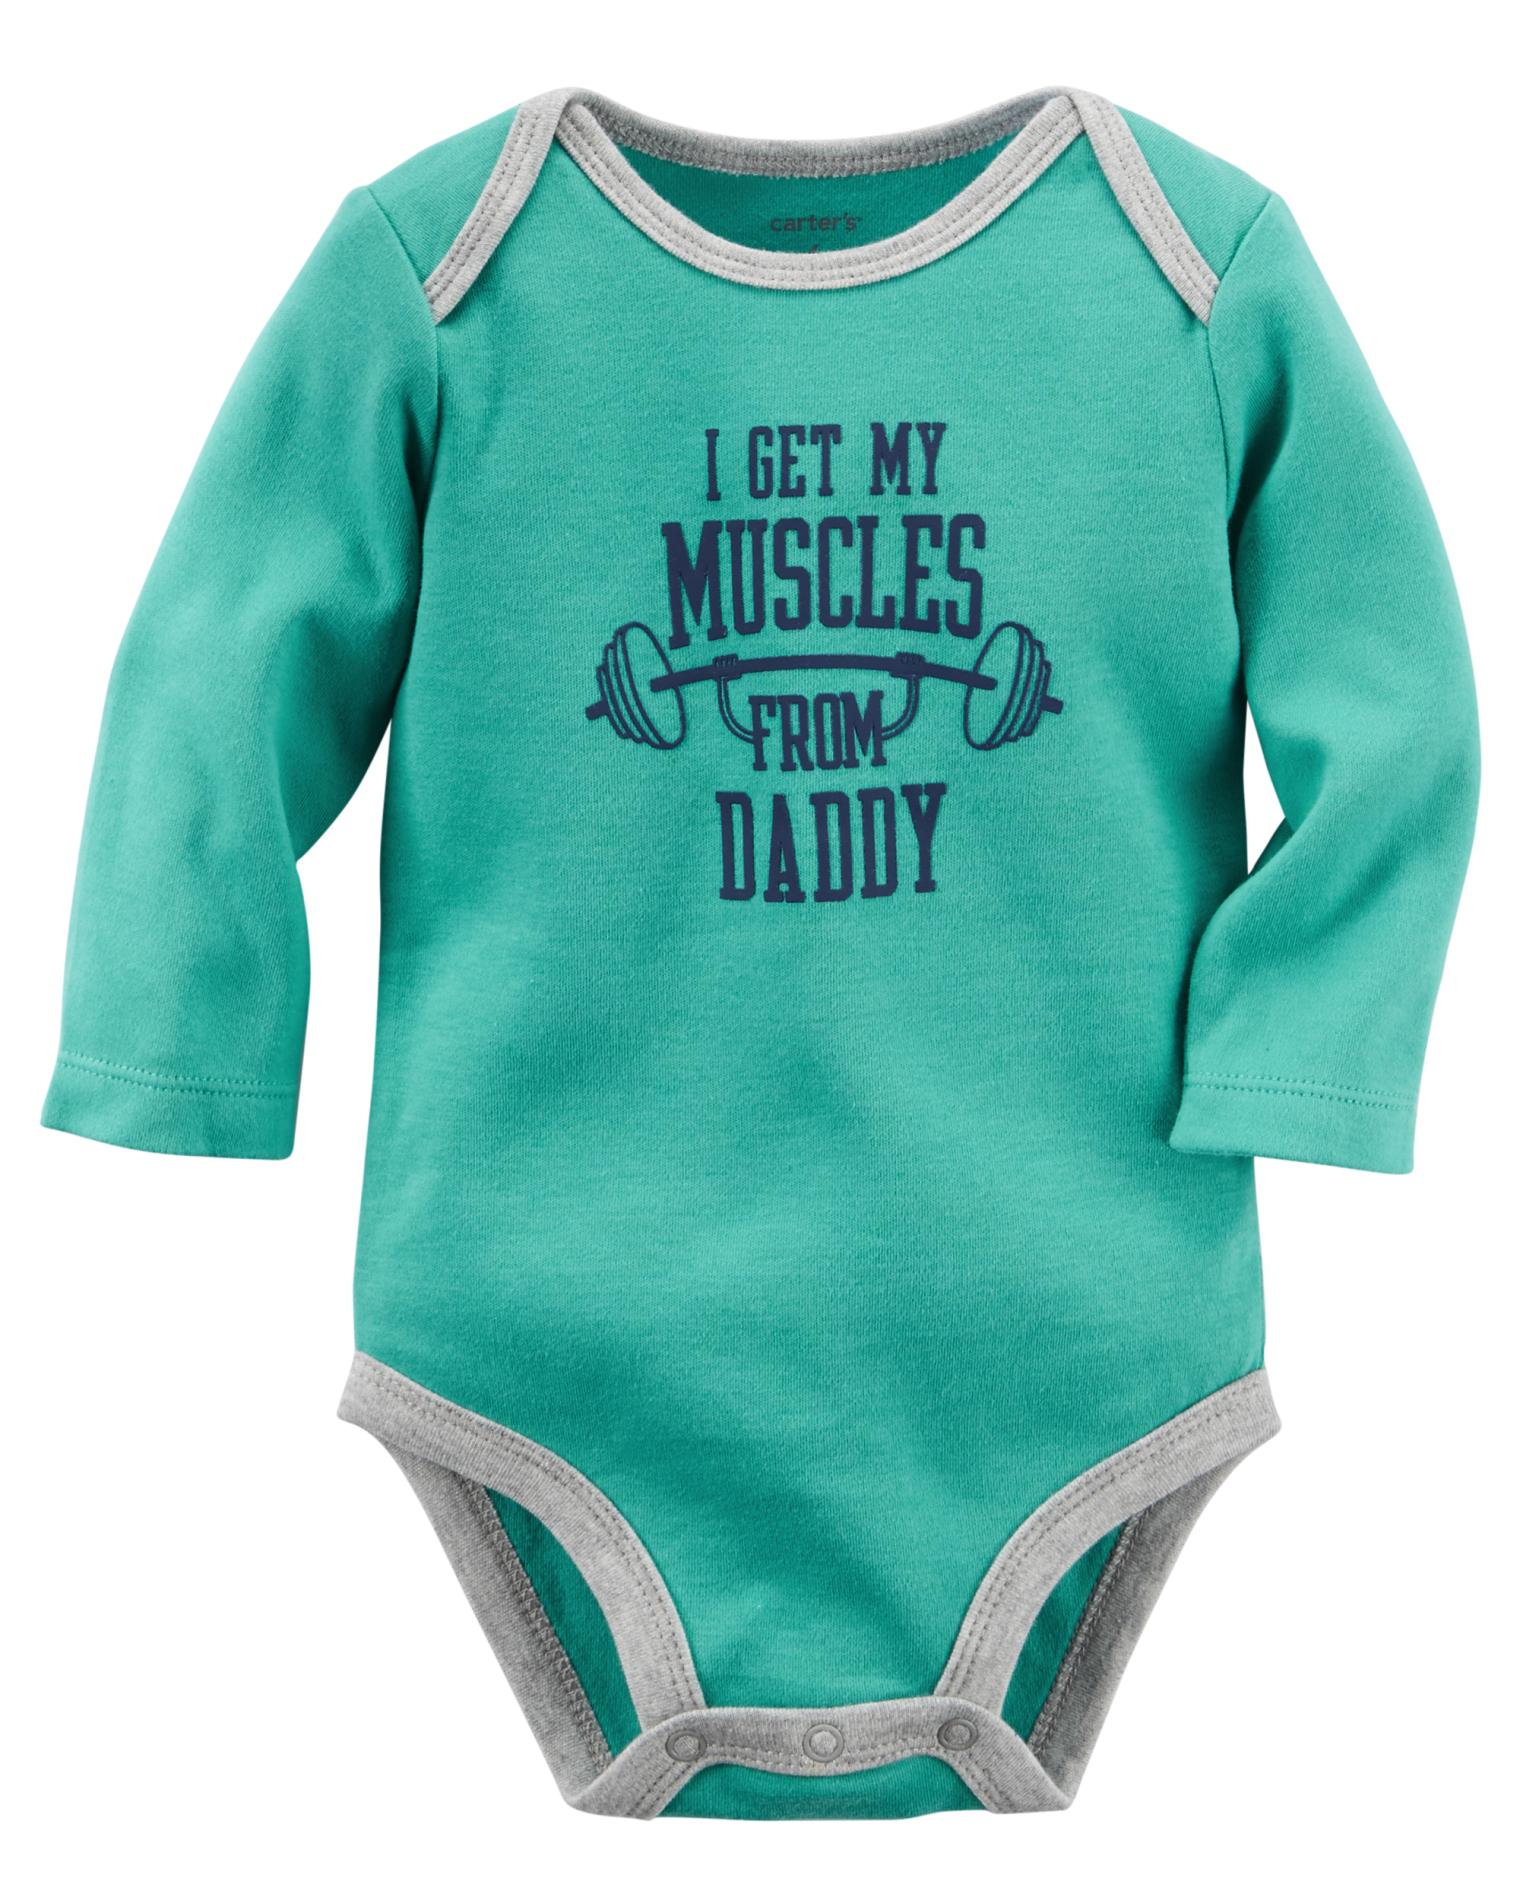 Carter's Newborn & Infant Boys' Bodysuit - Muscles From Daddy